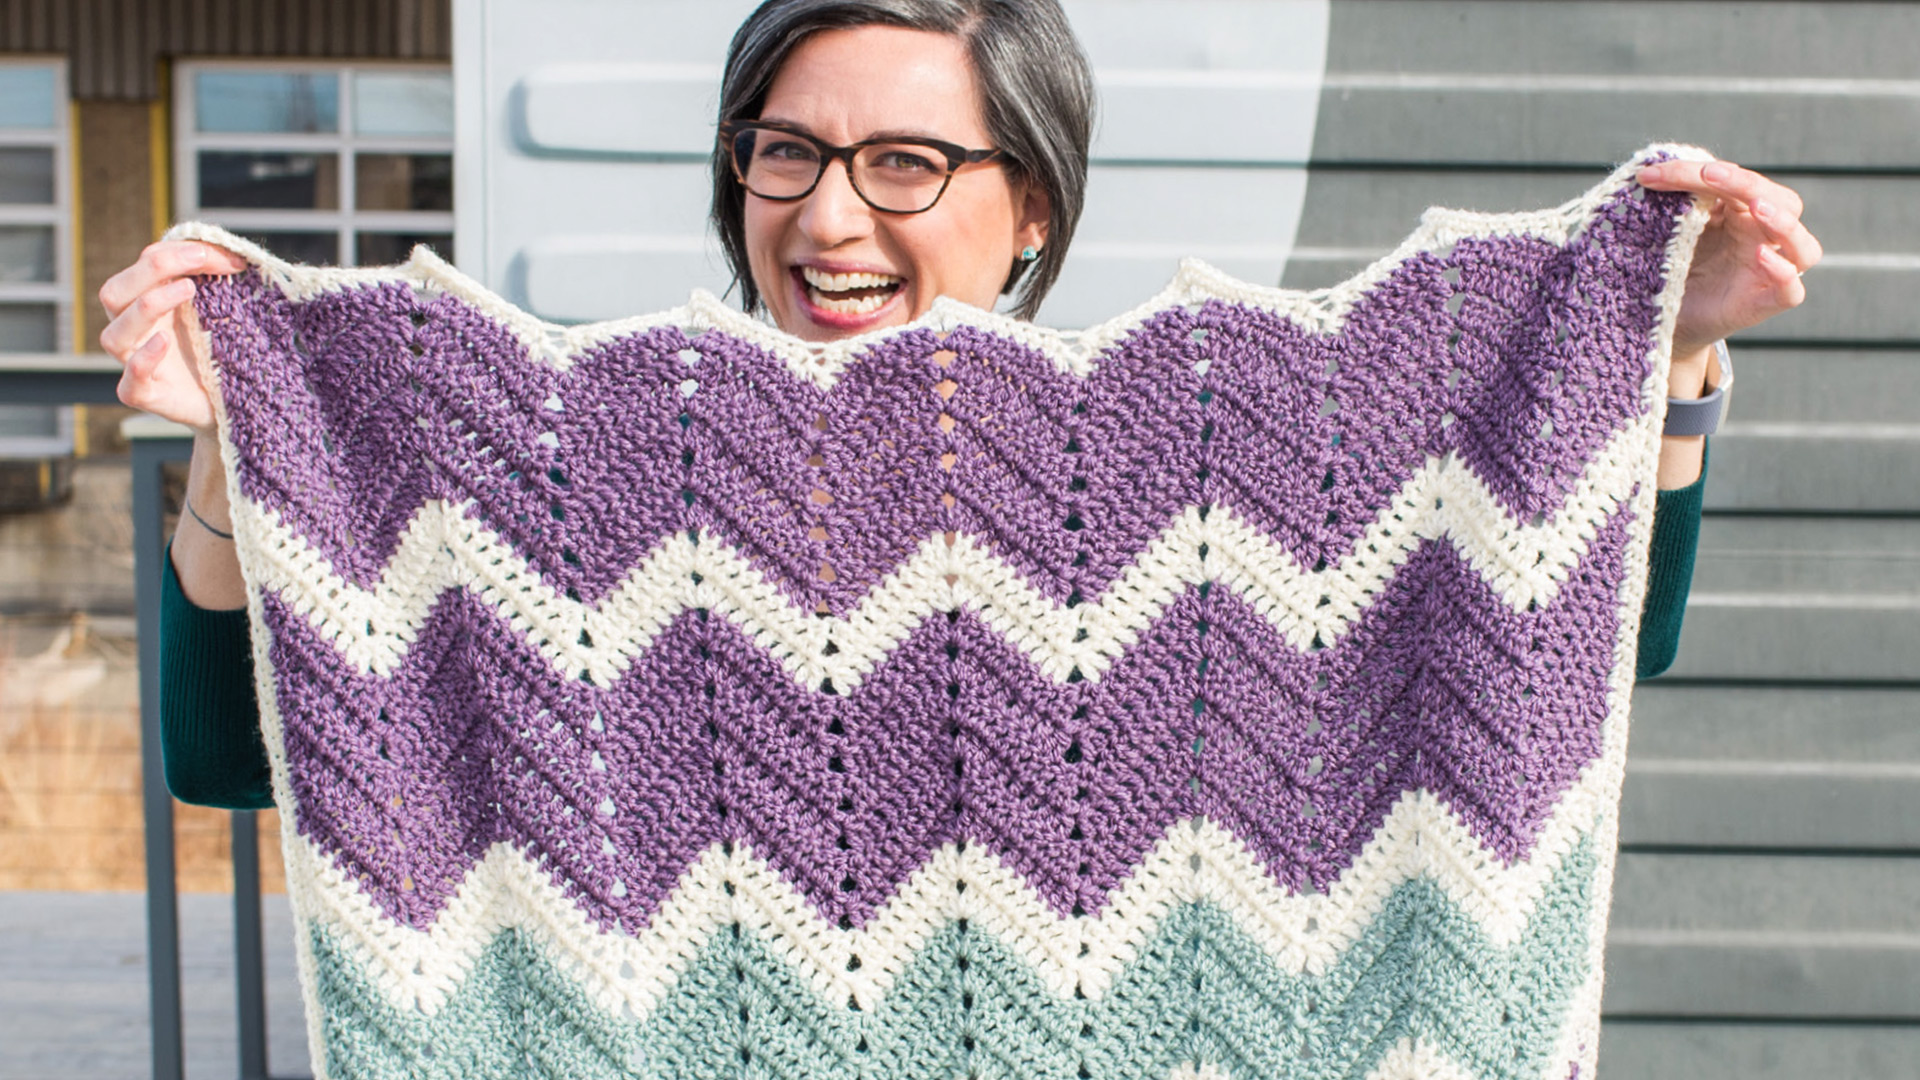 Classic Ripple Baby Blanket | Kim Werkerarticle featured image thumbnail.